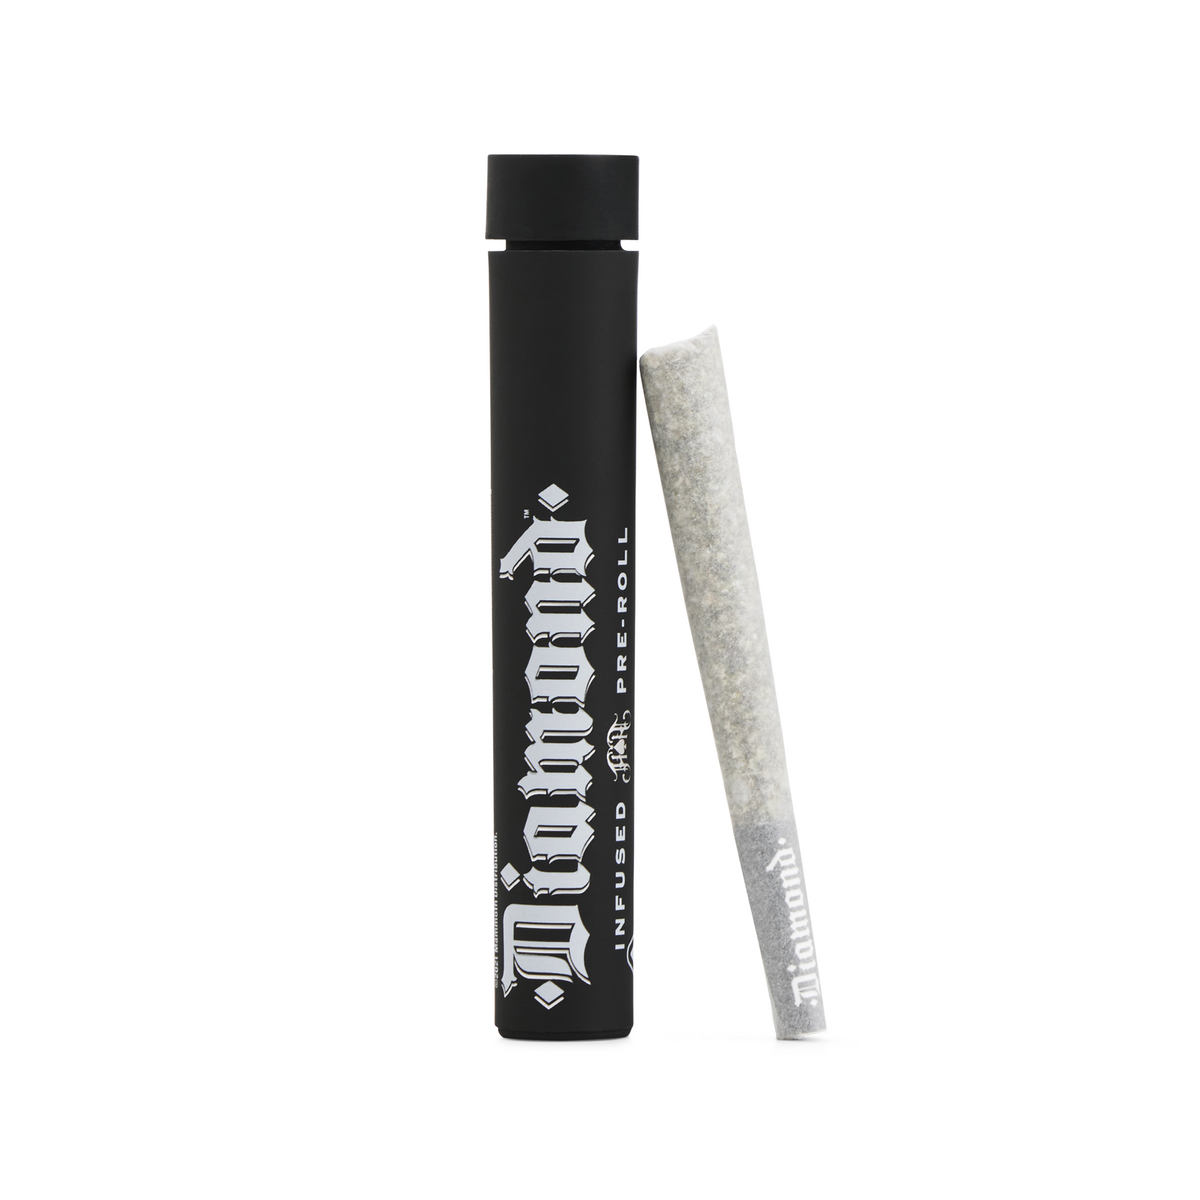 Garlic Z | Indica - Diamond THCA-Infused Pre-Roll - 1G Joint